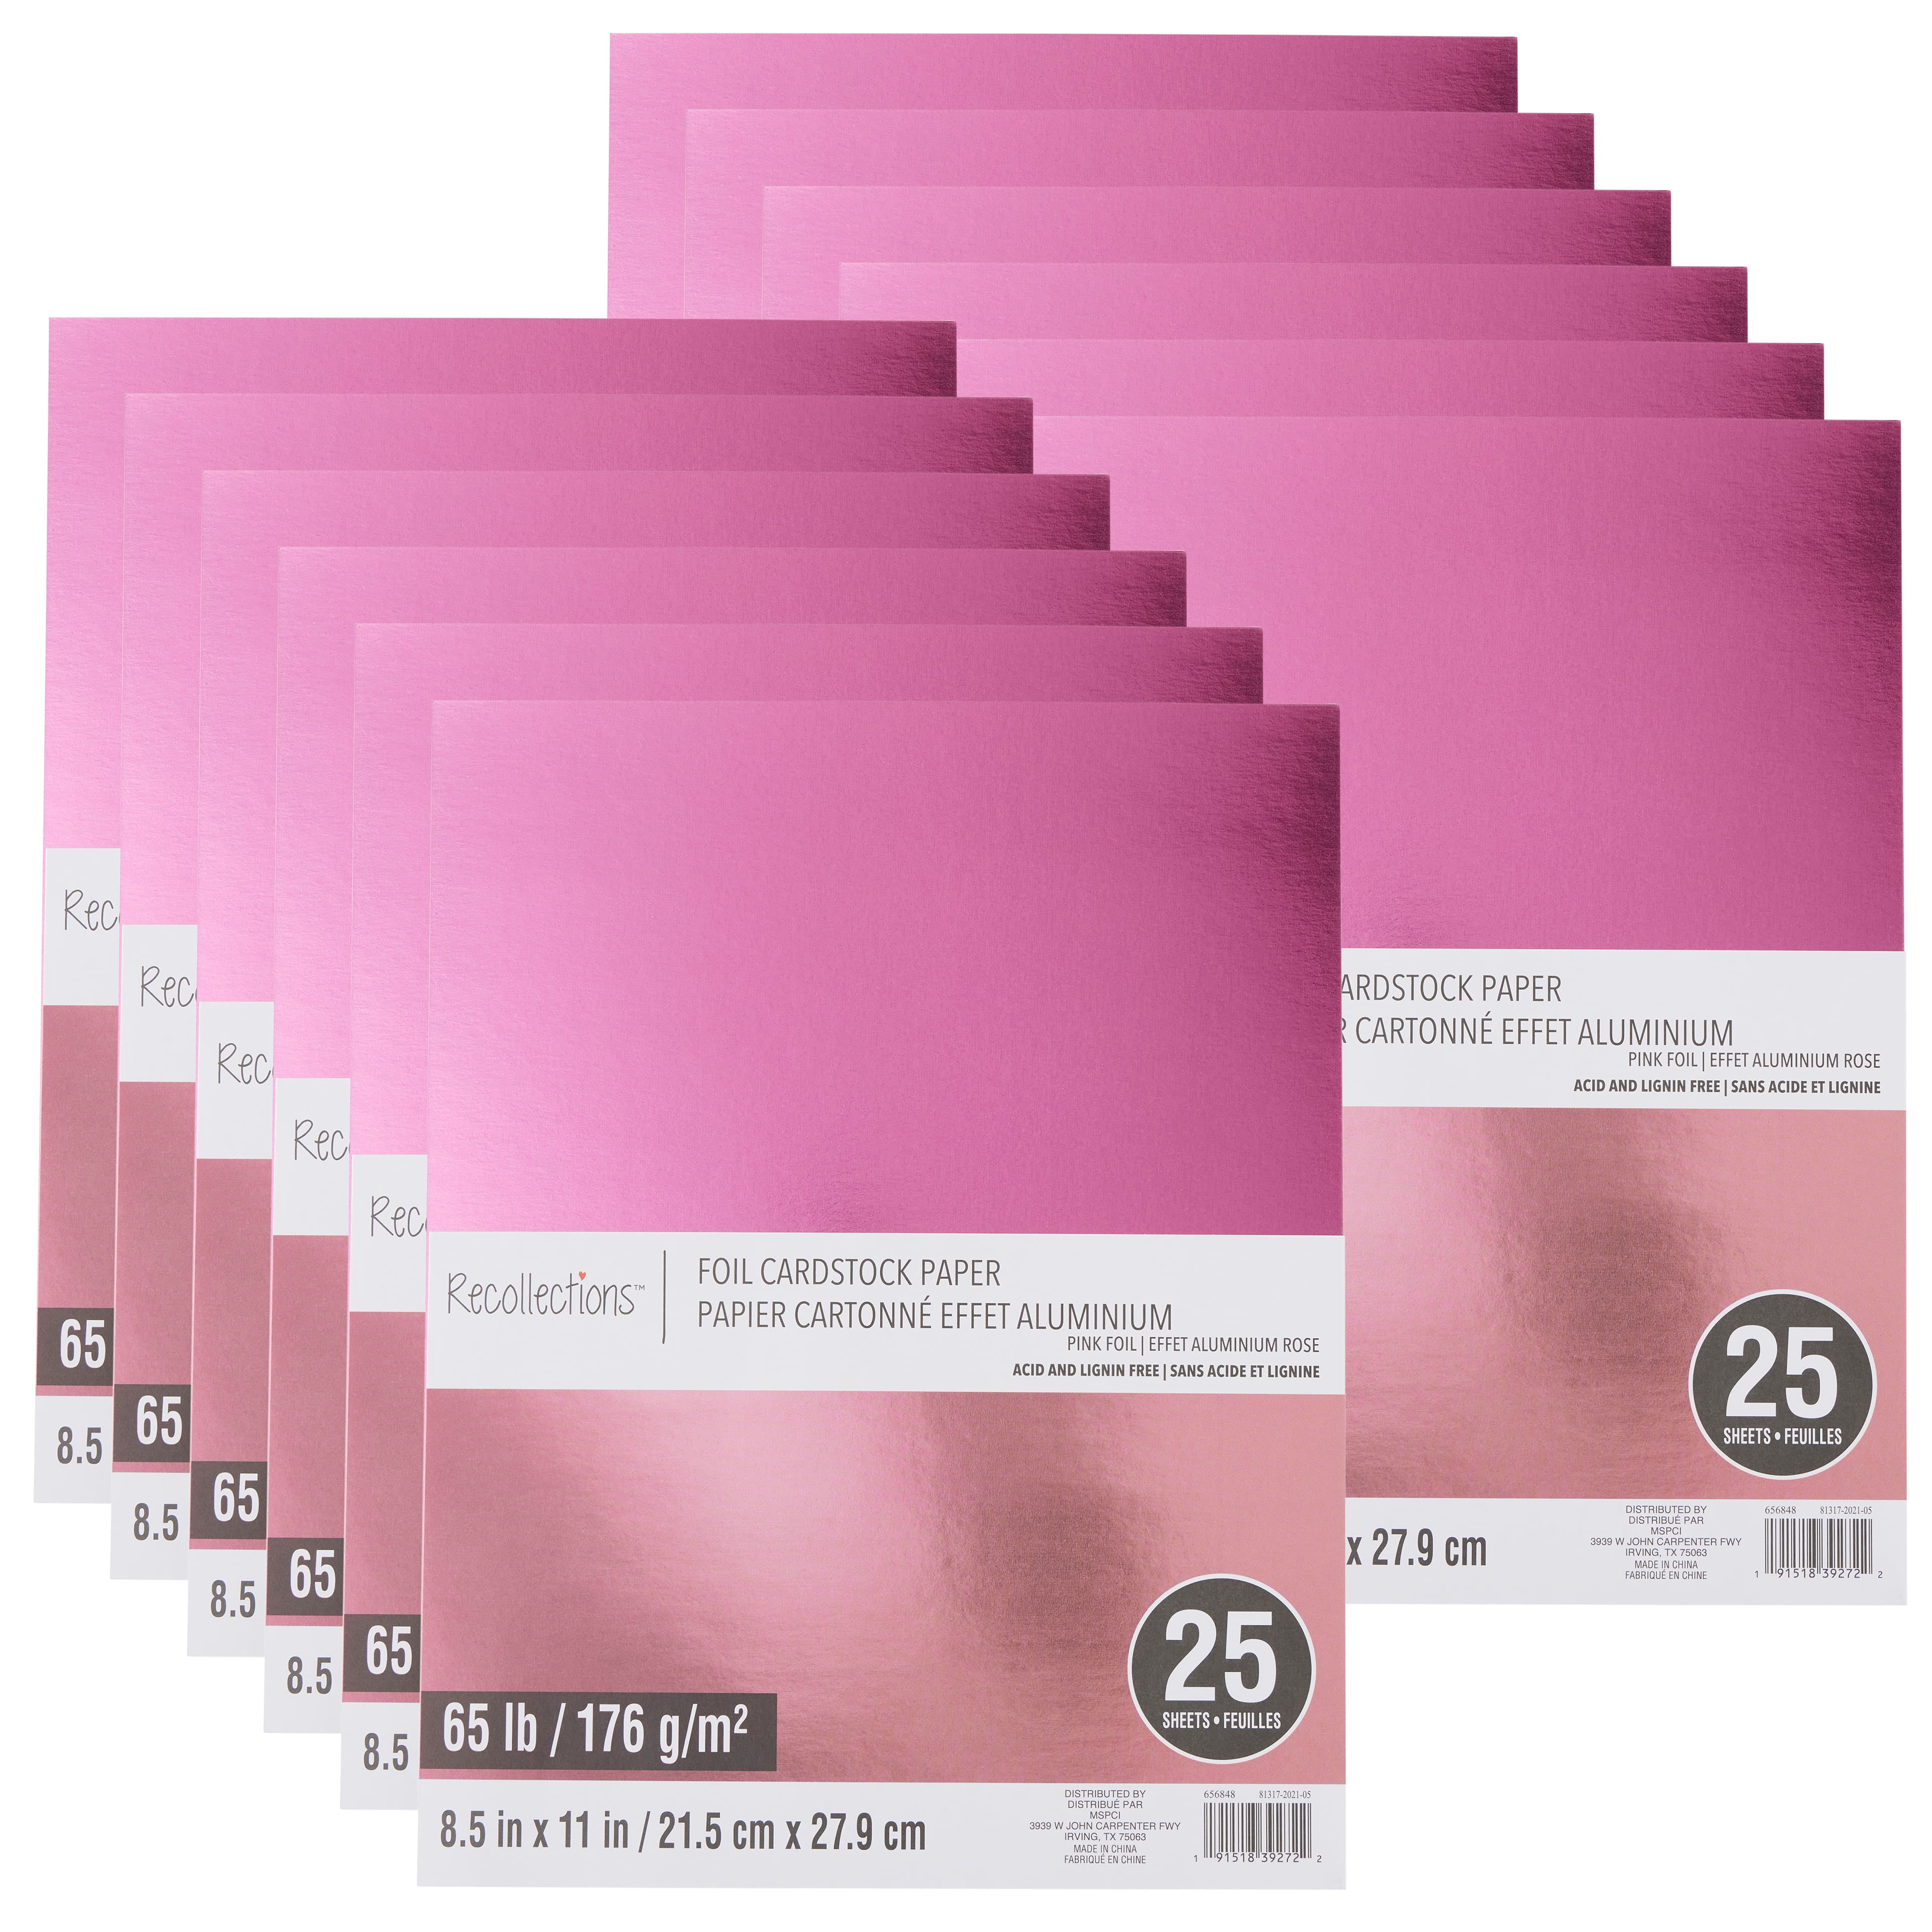 Michaels Bulk 12 Packs: 25 Ct. (300 Total) 12 inch x 12 inch Cardstock Paper by Recollections, Size: 12 x 12, Red